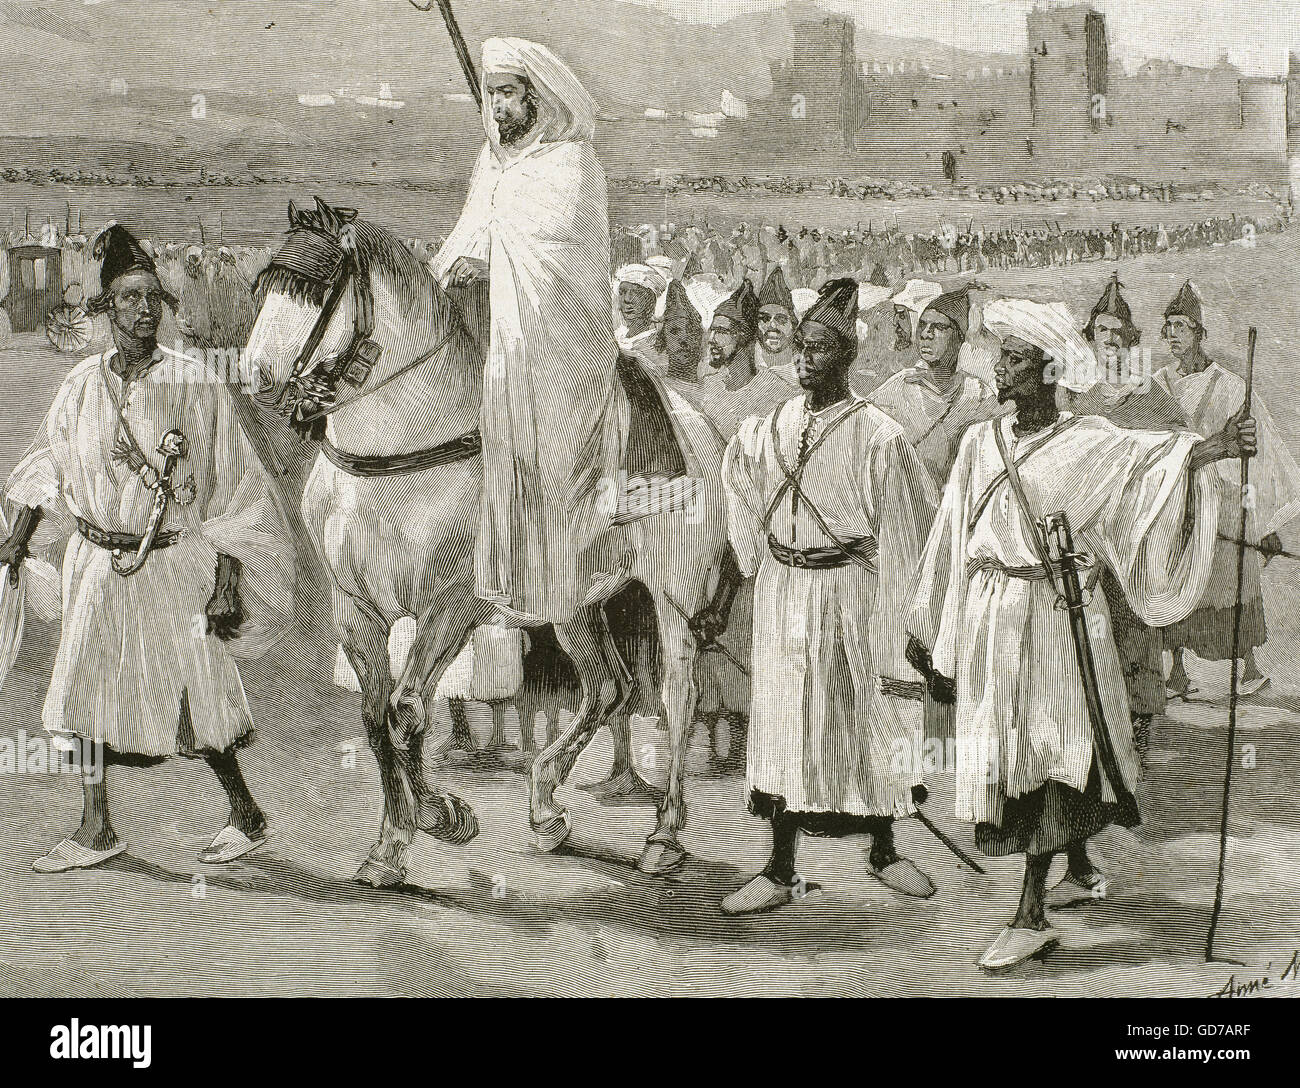 Hassan I (1836-1894), Sultan of Morocco (1873-1894), on horseback with his entourage. Engraving. Stock Photo